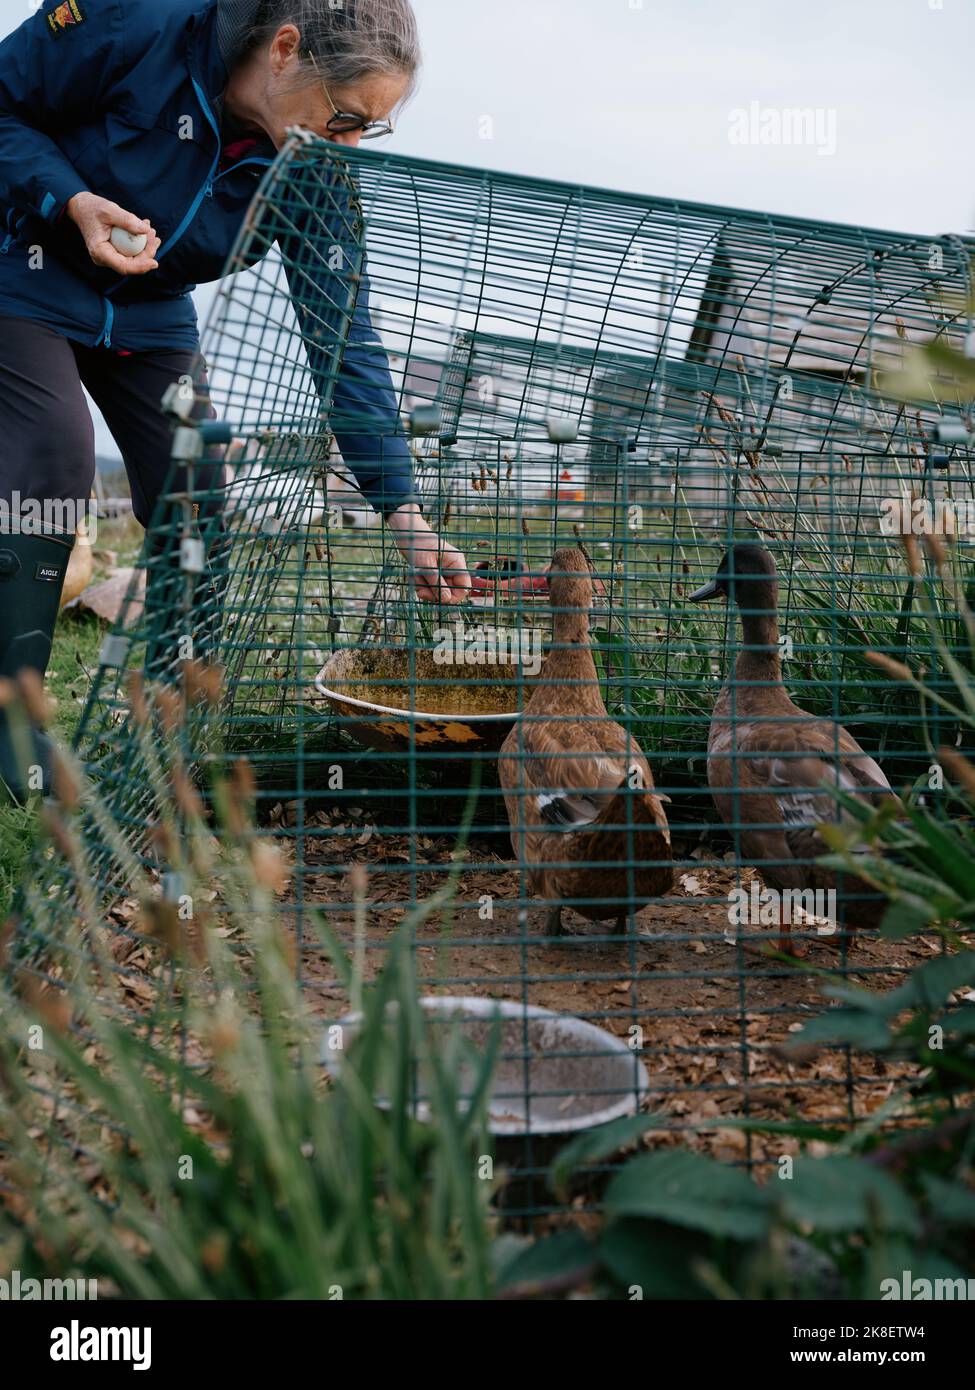 A smallholder collecting her duck eggs from the duck coop / pen - rural country living life Stock Photo